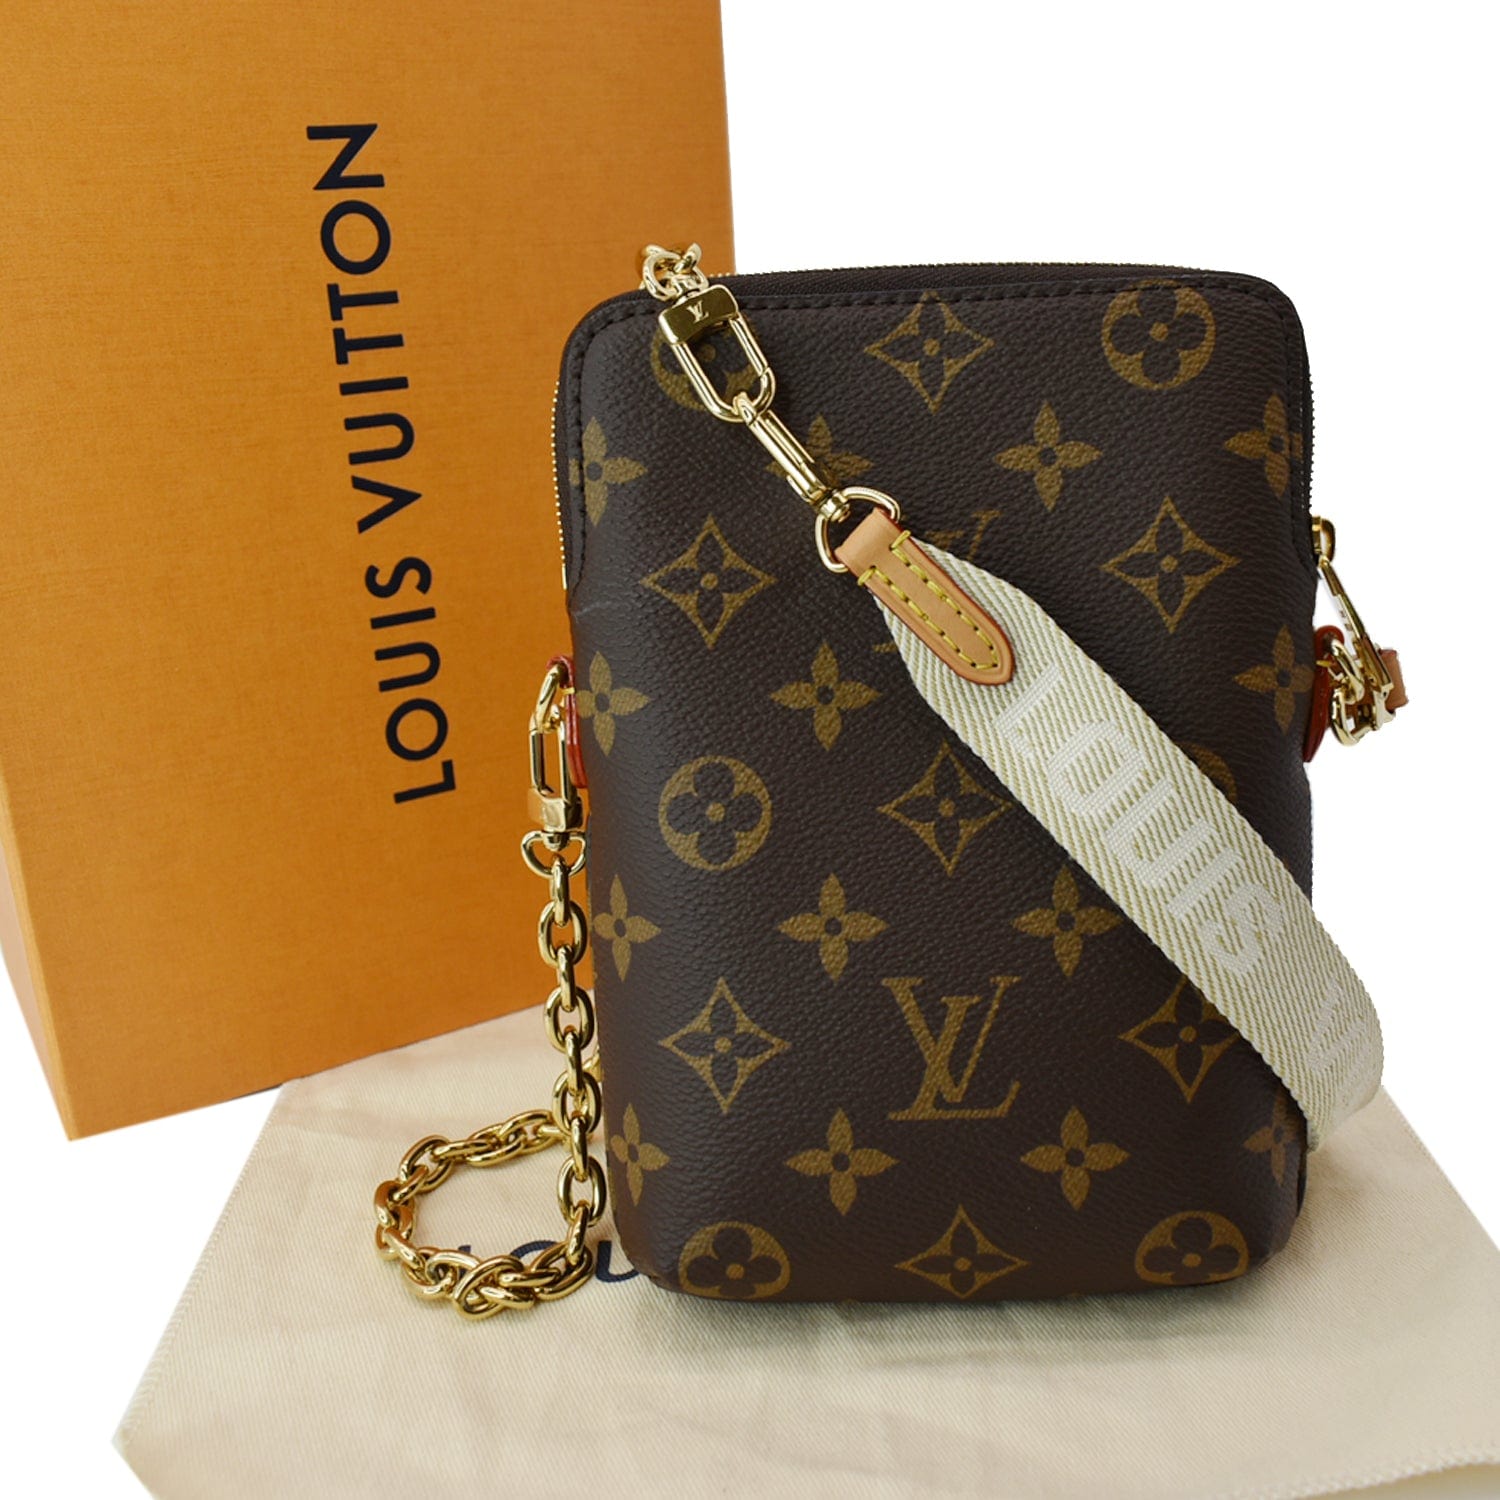 ALL ABOUT THE LOUIS VUITTON FOLD ME POUCH + UTILITY PHONE SLEEVE